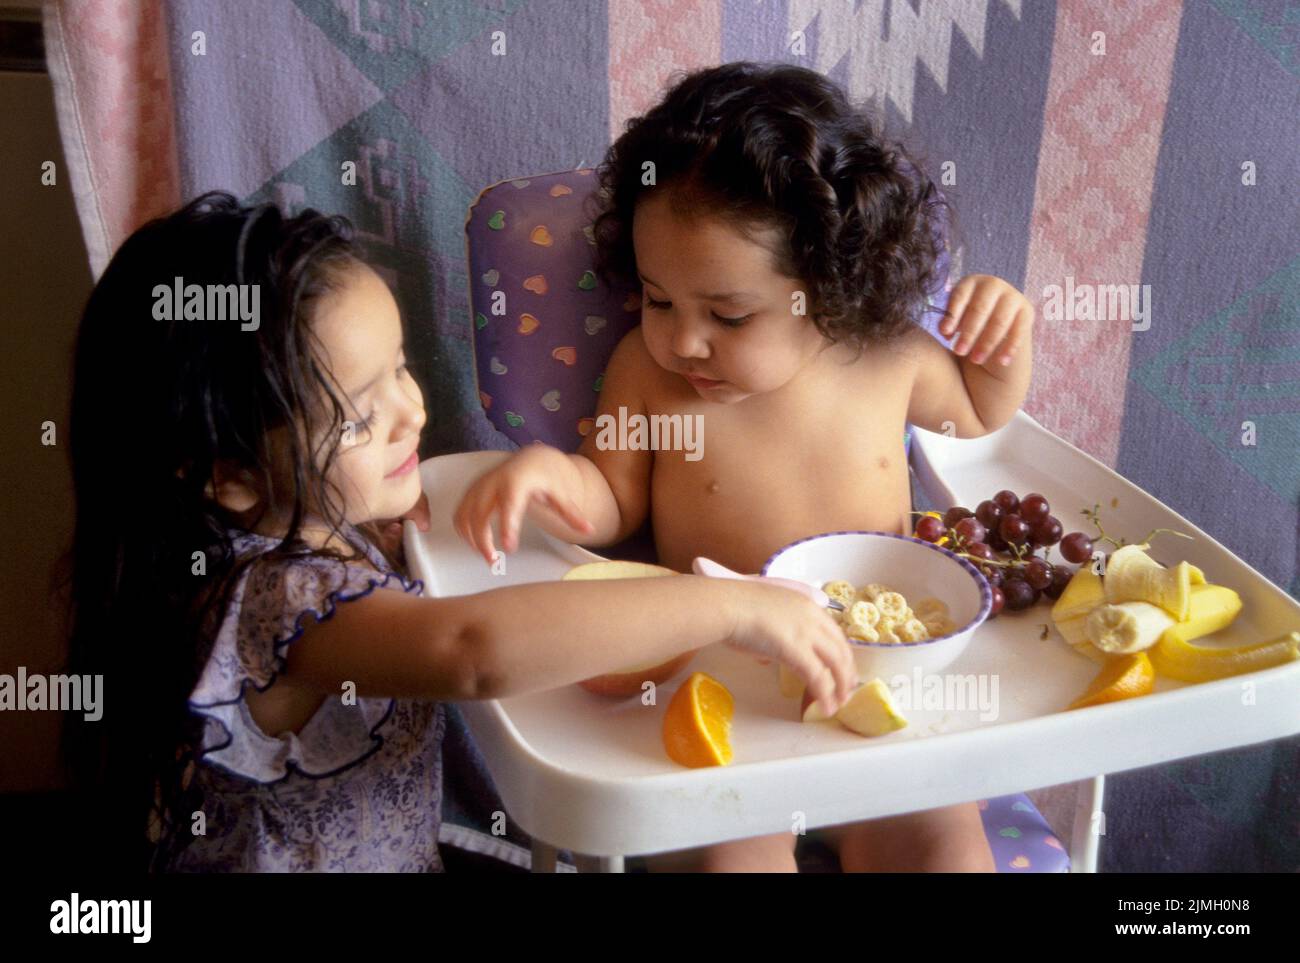 Native American family of two sisters share healthy nutritional food together of fruit and cereal Stock Photo